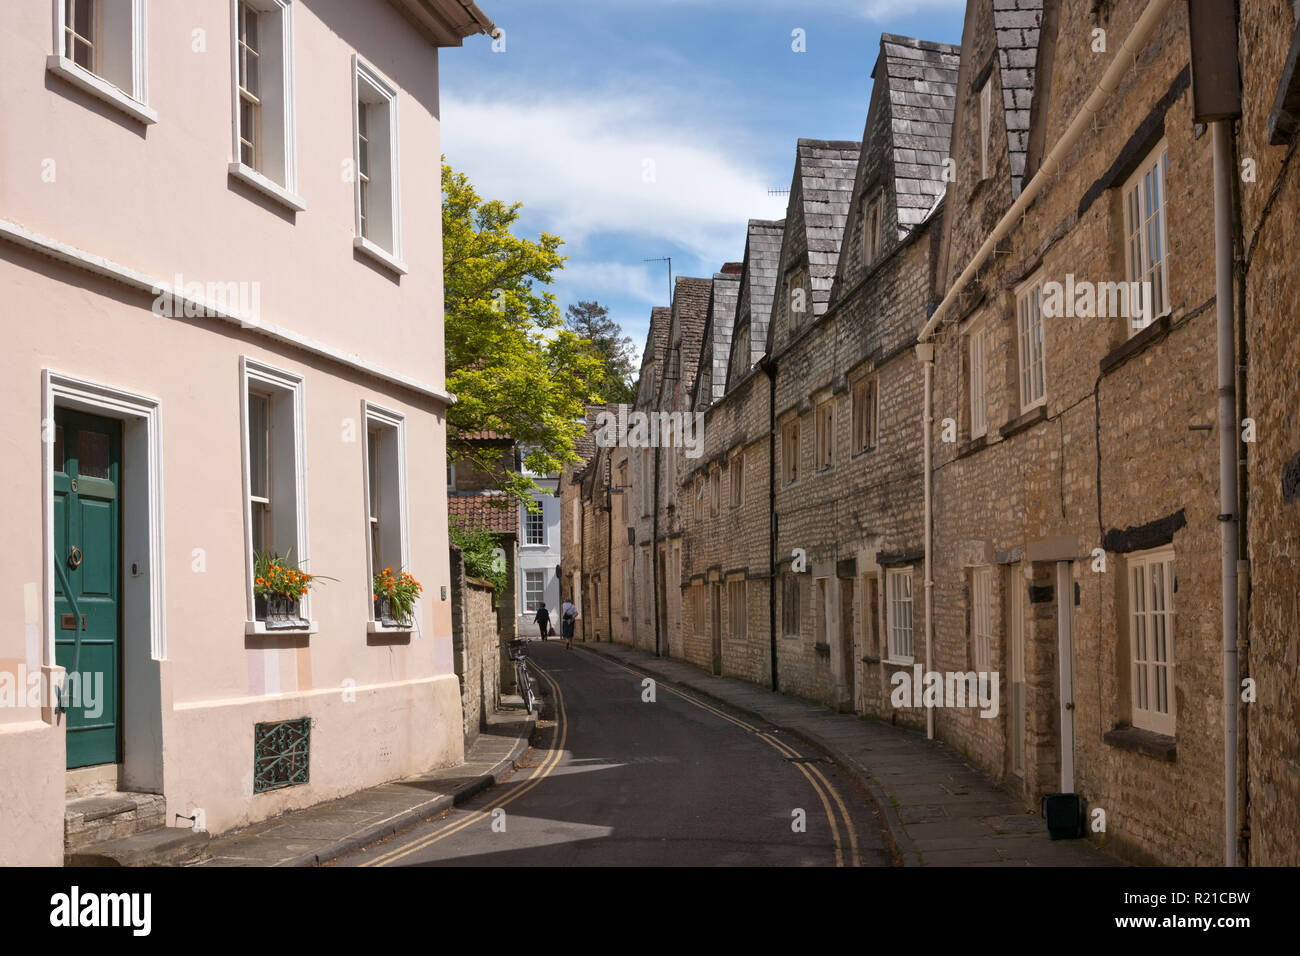 Typical Cotswold architecture in the quaint streets of Cirencester, Gloucestershire, Cotswolds, UK Stock Photo